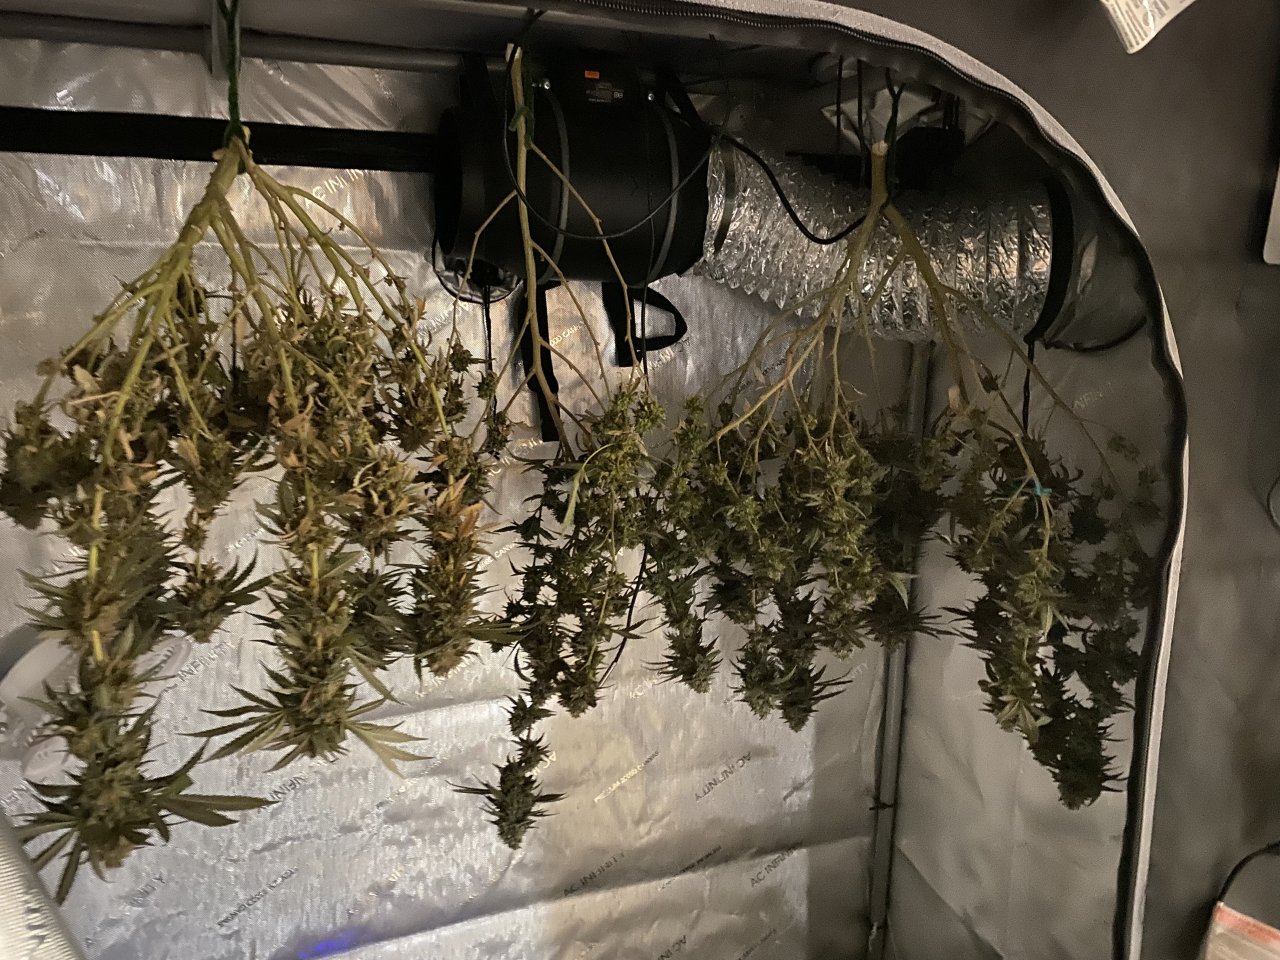 Drying in the tent